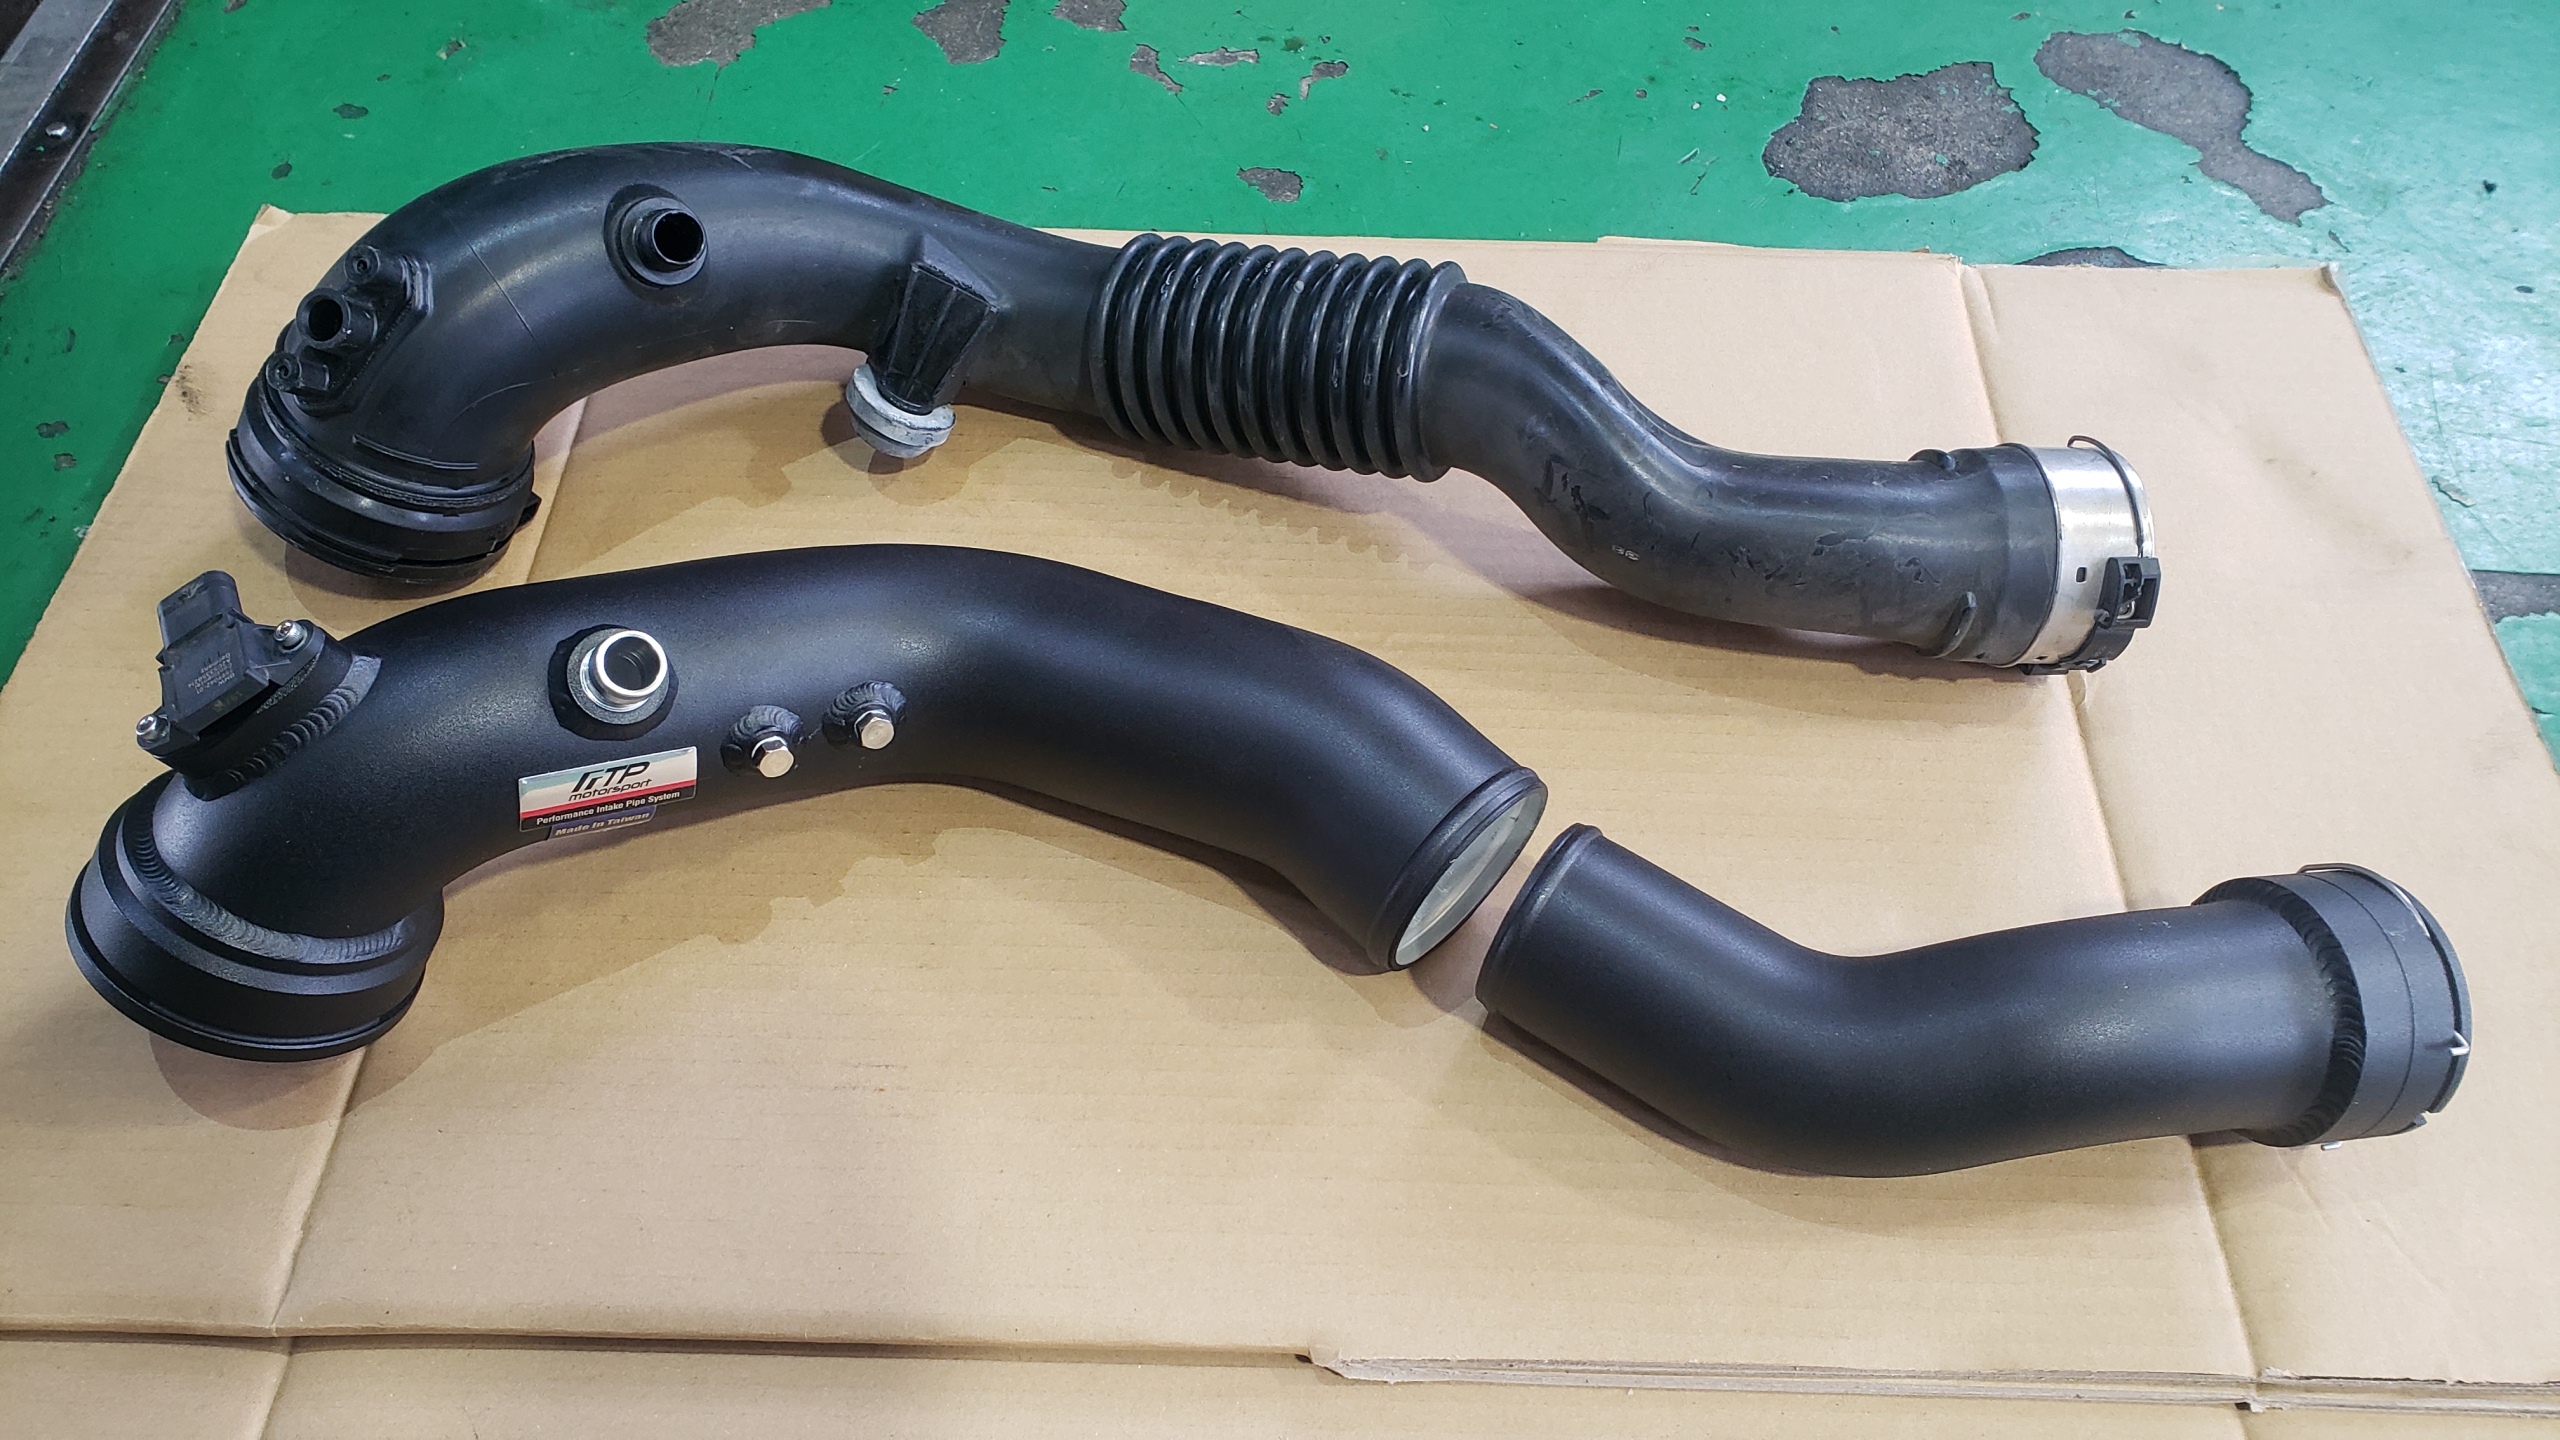 BMW F25 X3 N55 冷却インテーク ターボチャージ パイプ アルミ製 CHARGE PIPE BOOST PIPE  エンジン、過給器、冷却、燃料系パーツ